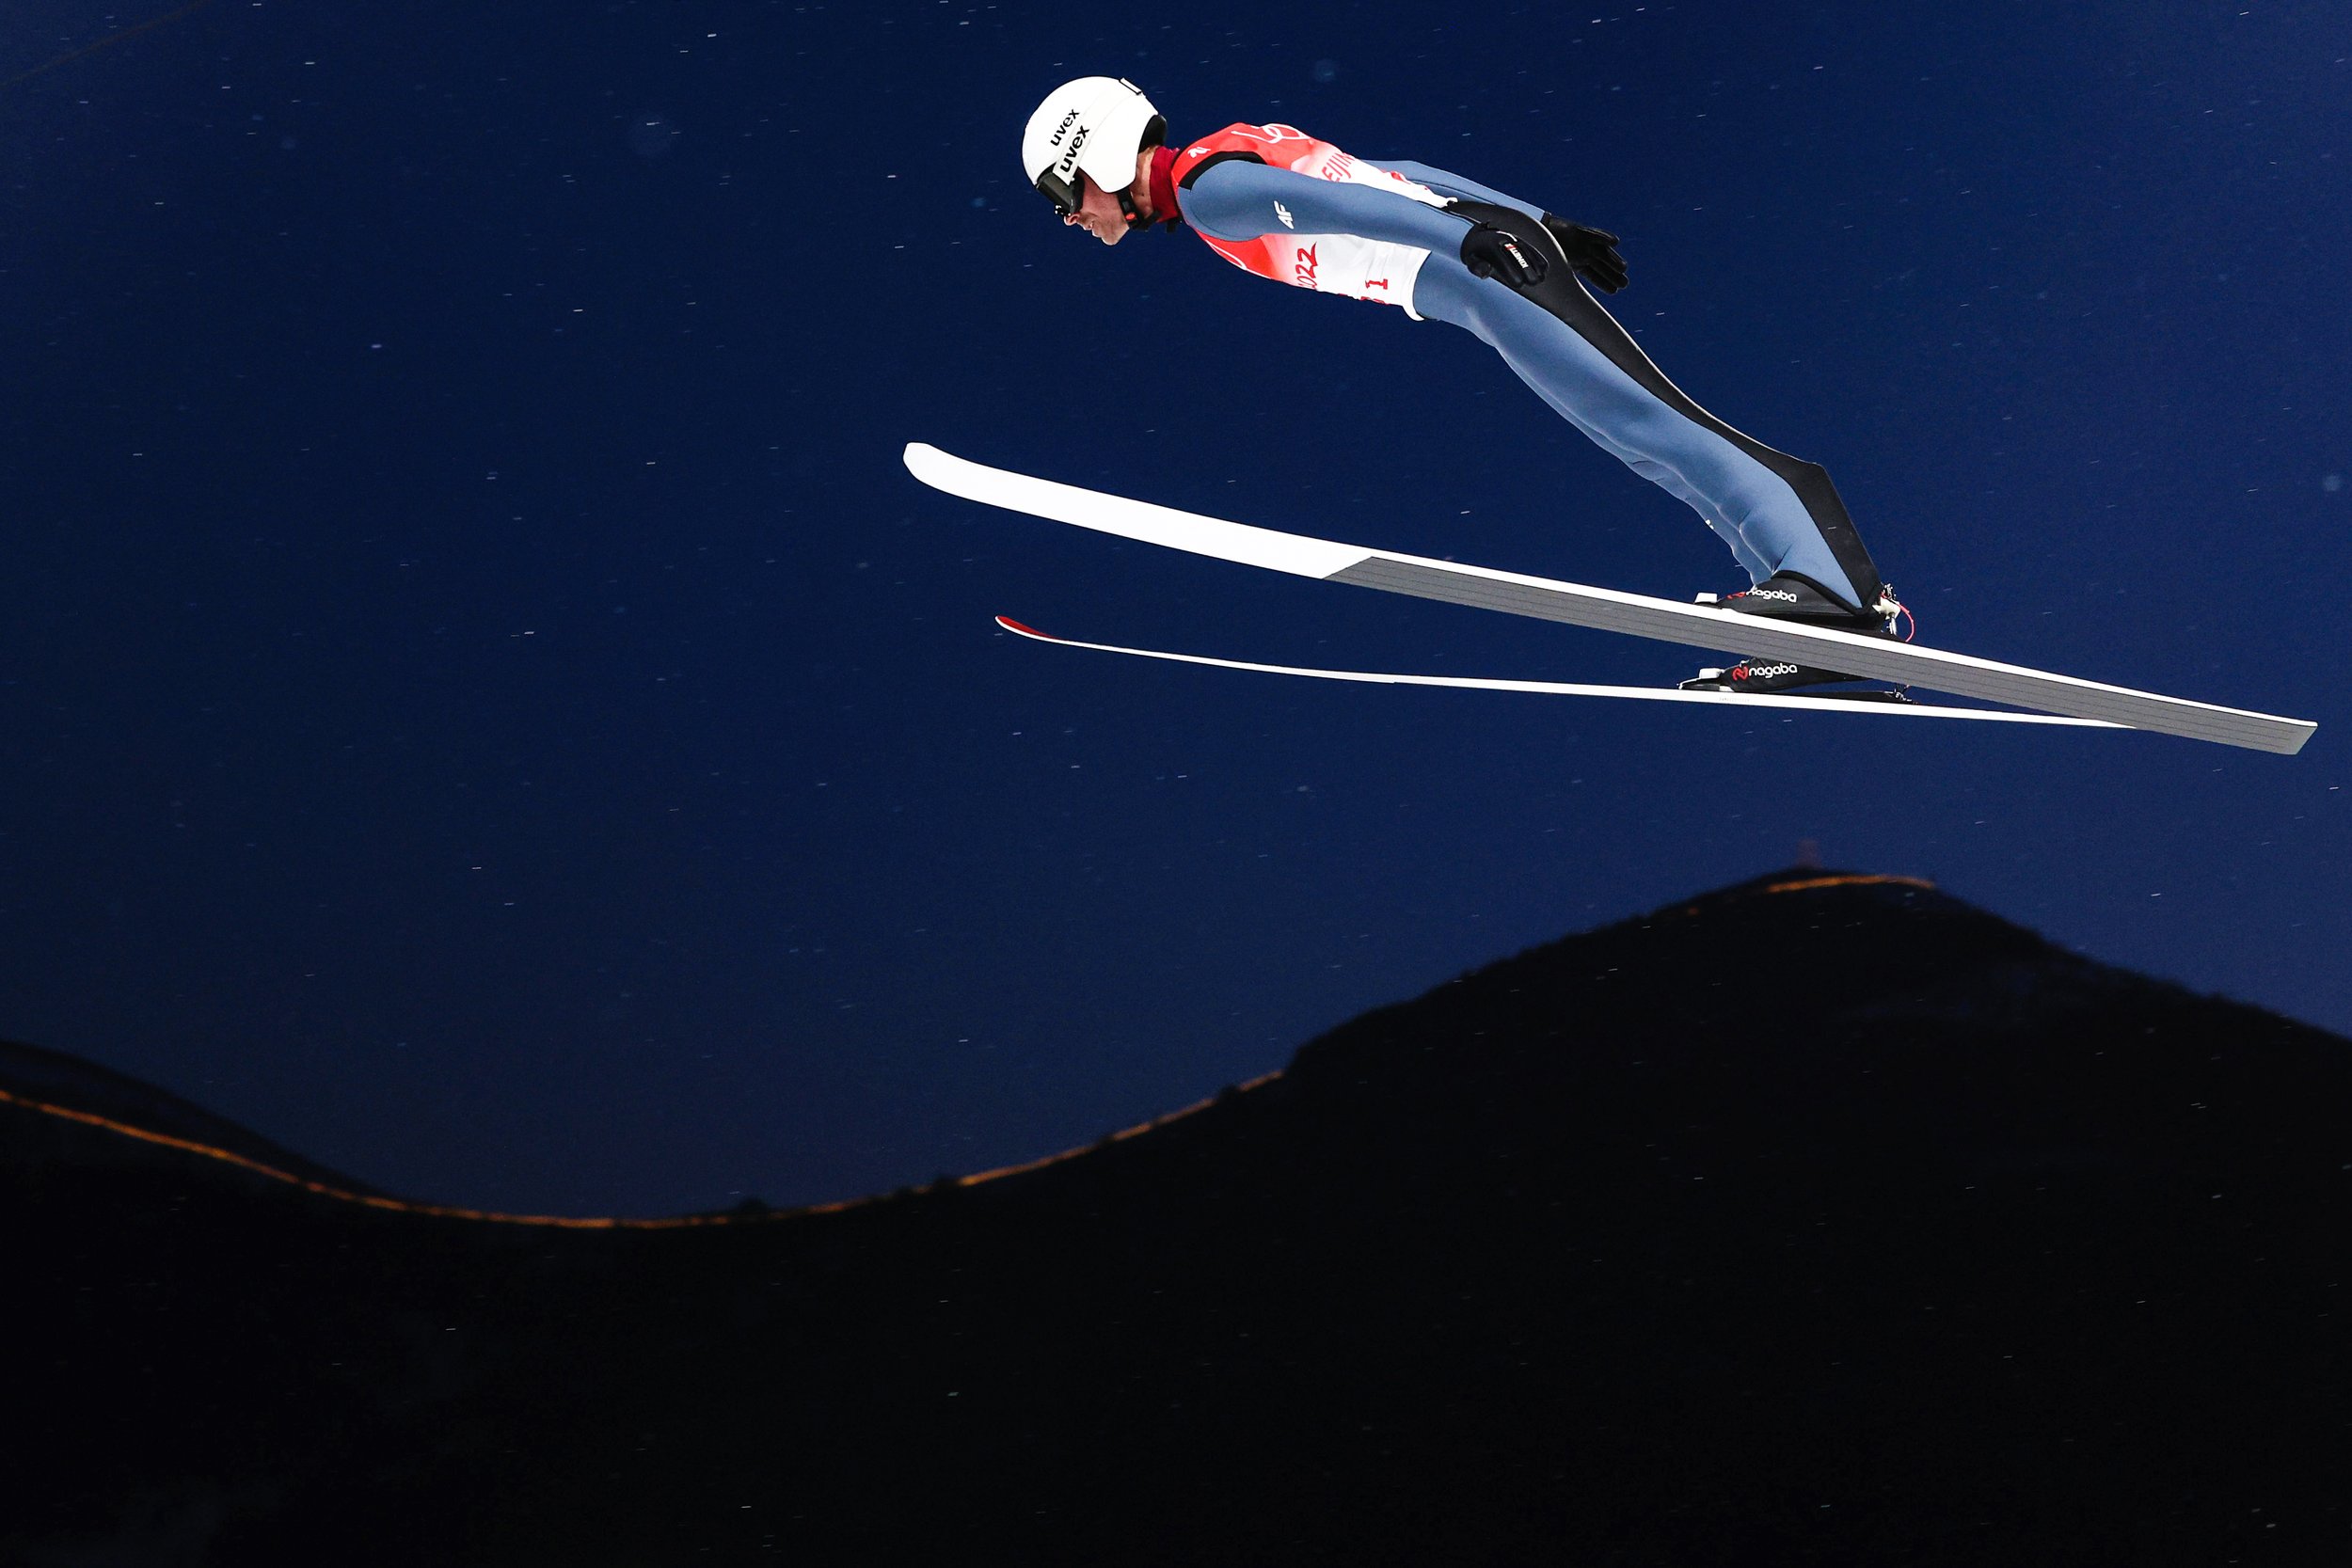  Piotr Zyla of Team Poland competes during Men's Ski jumping Trial Round For Competition on Day 10 of Beijing 2022 Winter Olympics at National Ski Jumping Centre on February 14, 2022 in Zhangjiakou, China. 